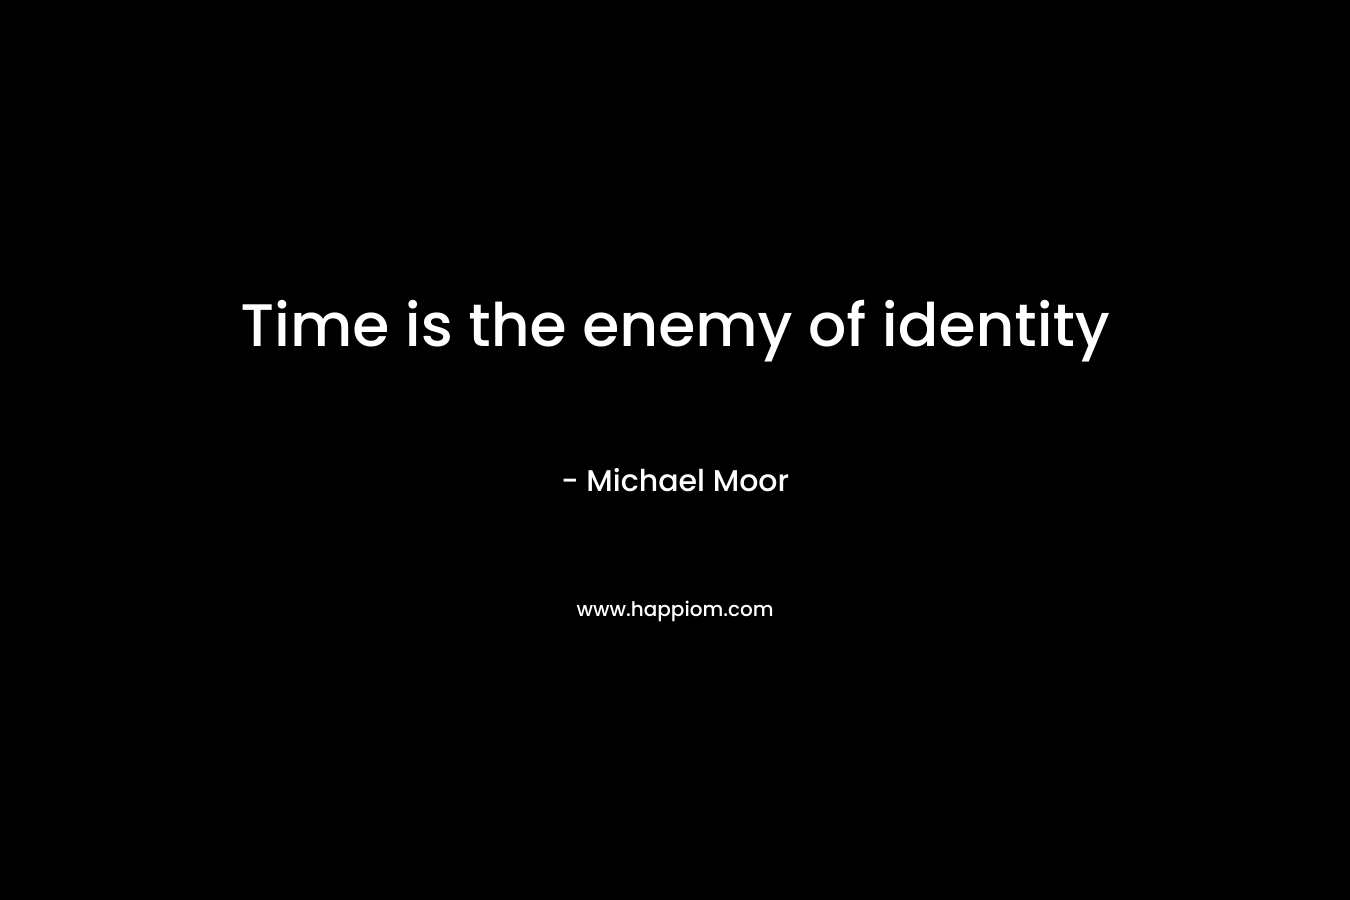 Time is the enemy of identity